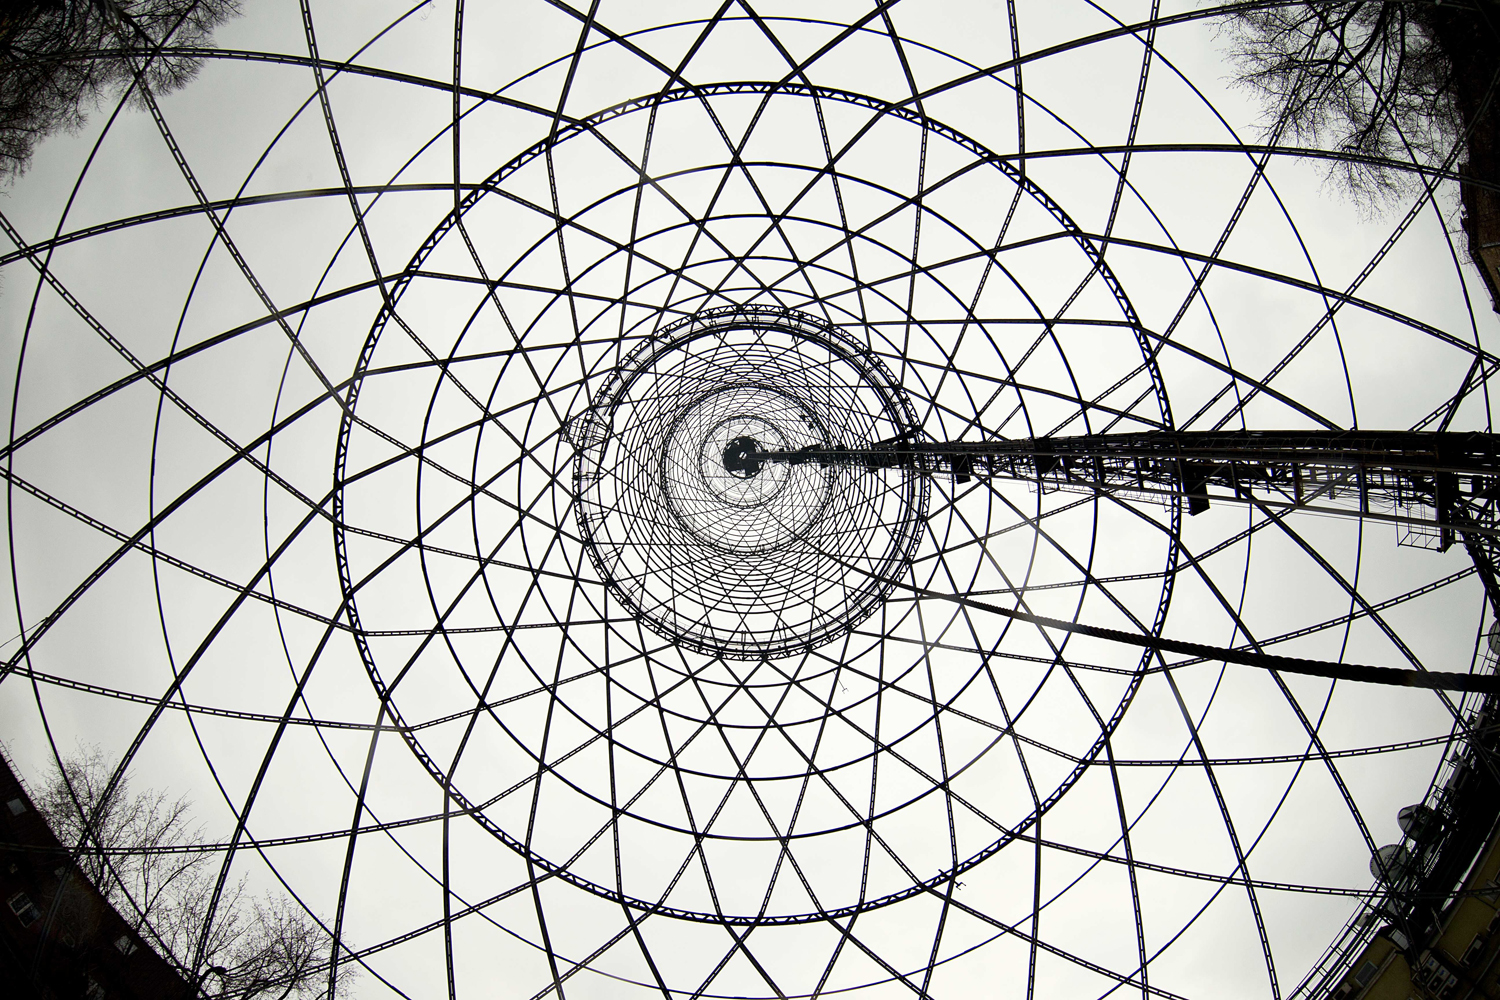 Apr. 4, 2014.  The Shukhov broadcasting tower shot from the ground in Moscow, Russia. The Shukhov Tower, one of the symbols of Soviet constructivists architecture, known as Russiaís Eiffel tower, is now under threat of demolition.